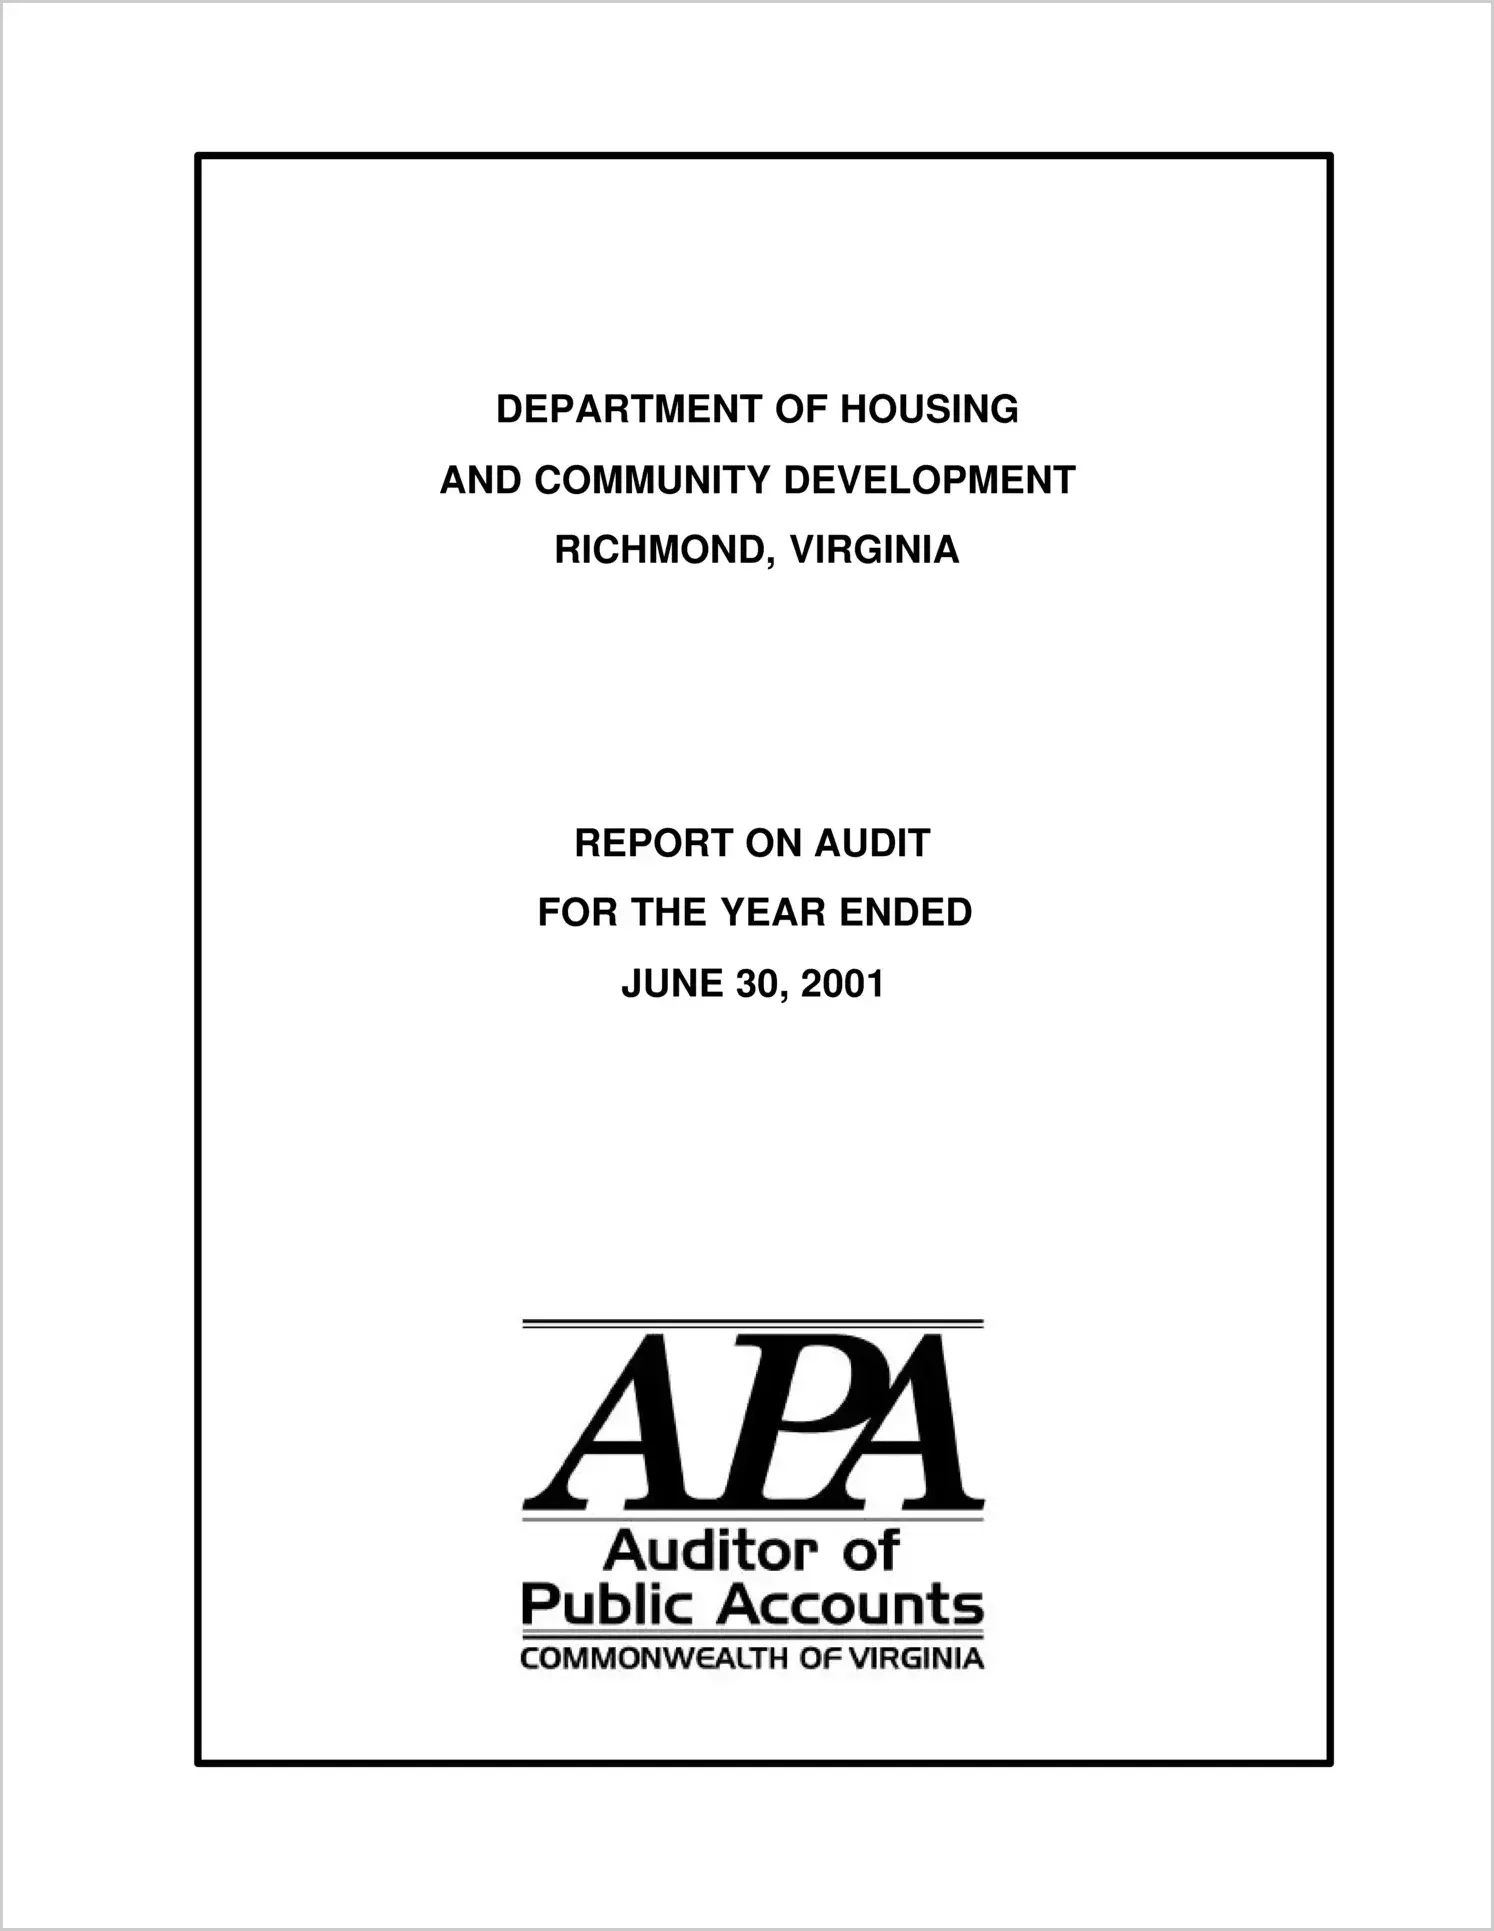 Department of Housing and Community Development for the year ended June 30, 2001